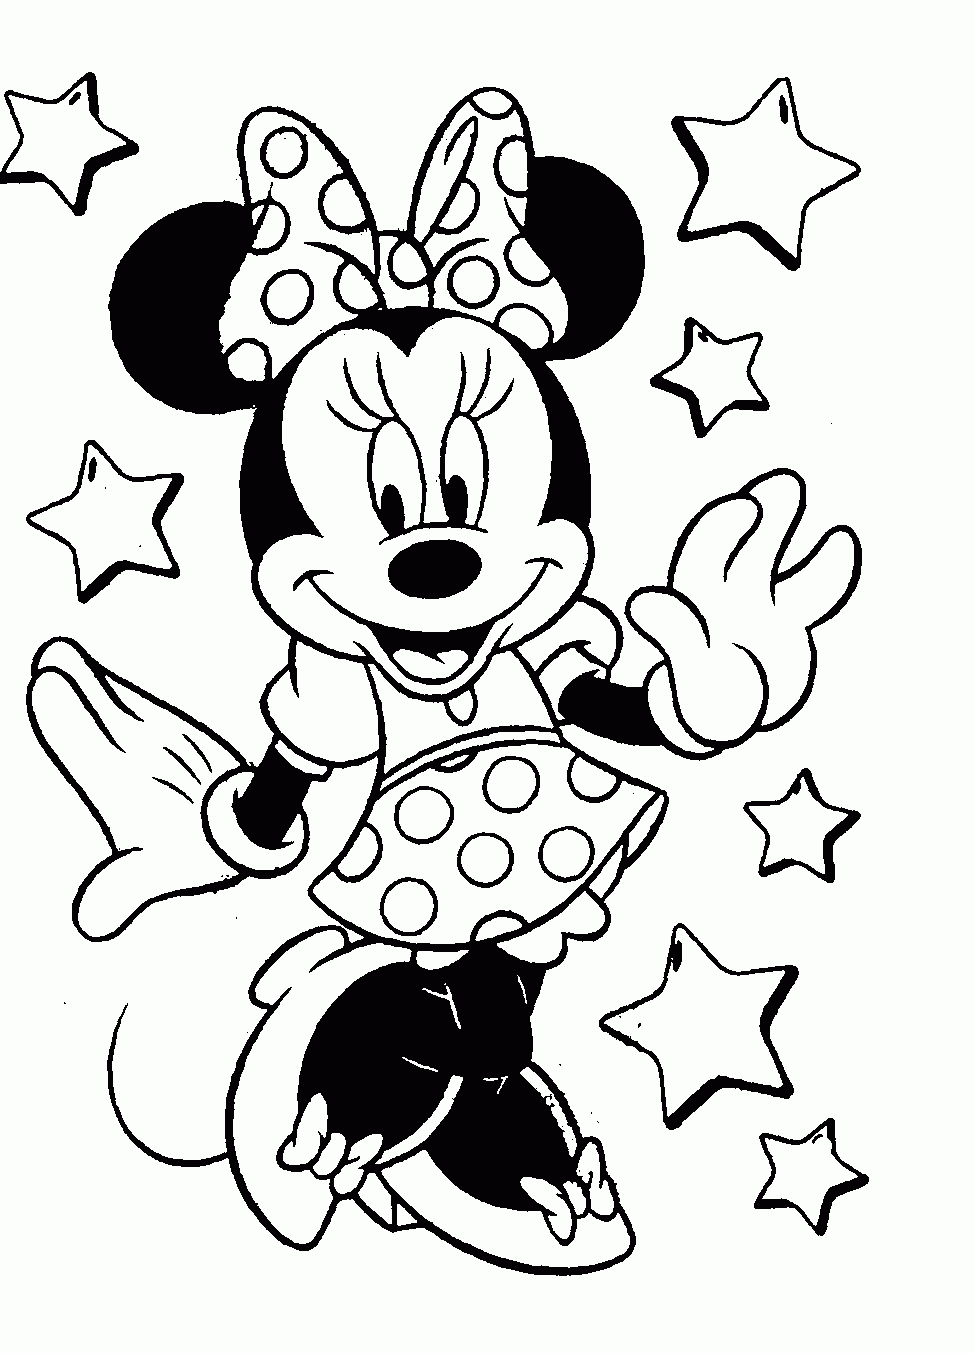 Free Disney Coloring Pages. All In One Place, Much Faster Than - Free Printable Disney Coloring Pages